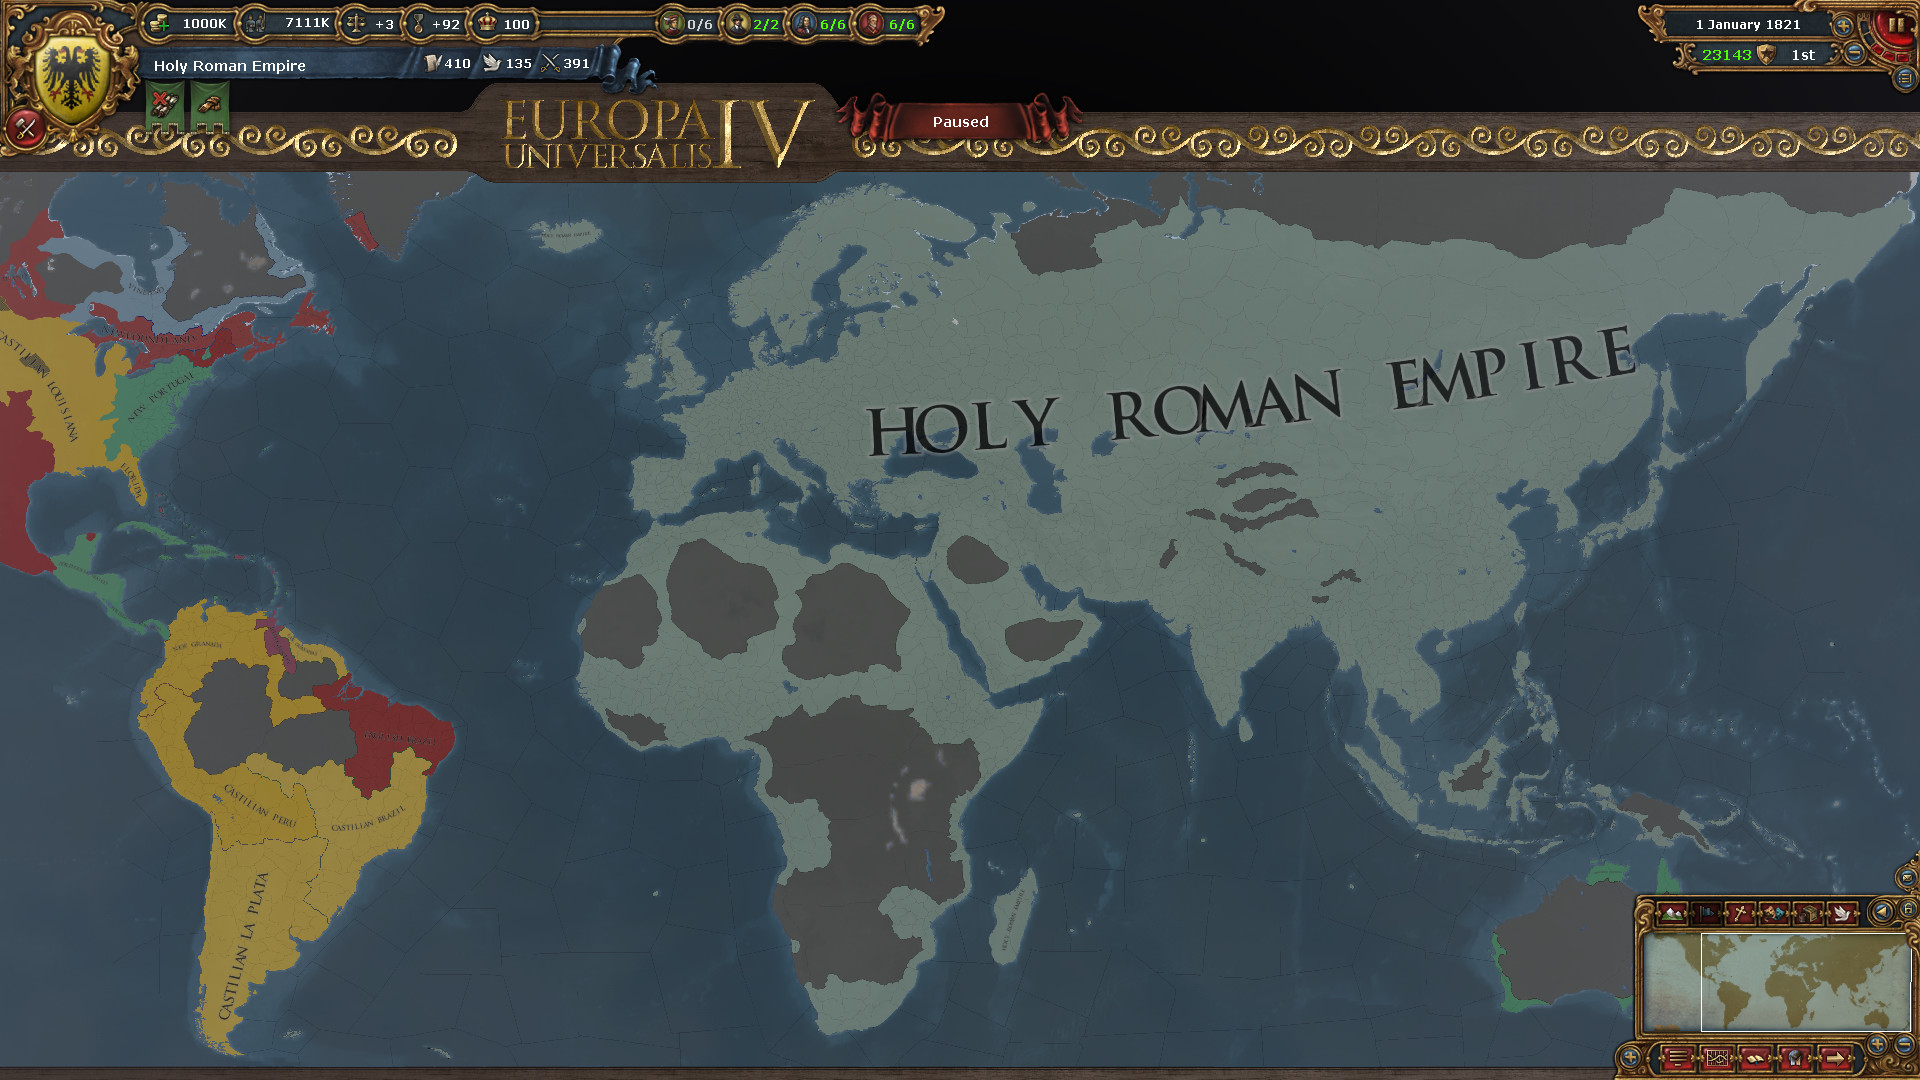 1920x1080 World conquest, Burgundy > Netherlands > Holy Roman empire possibly the  first One Tag, One Religion, One culture world conquest ever?